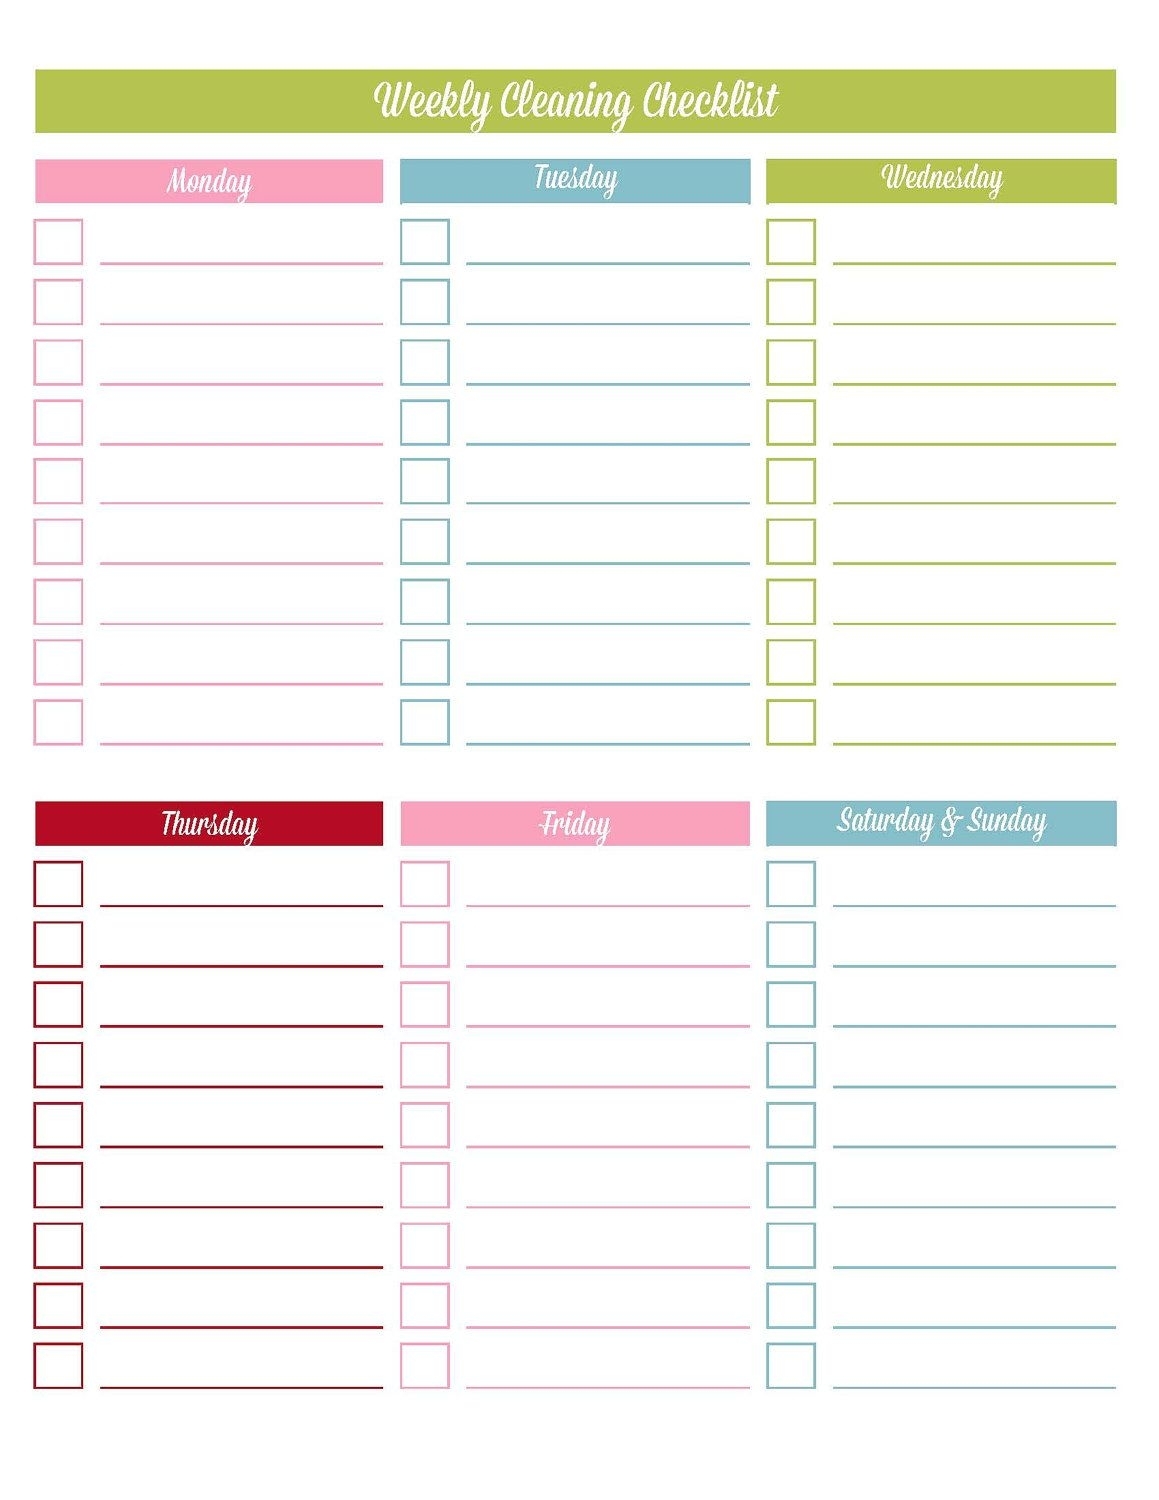 Printable Blank Weekly Checklist Template In 2020 | Cleaning